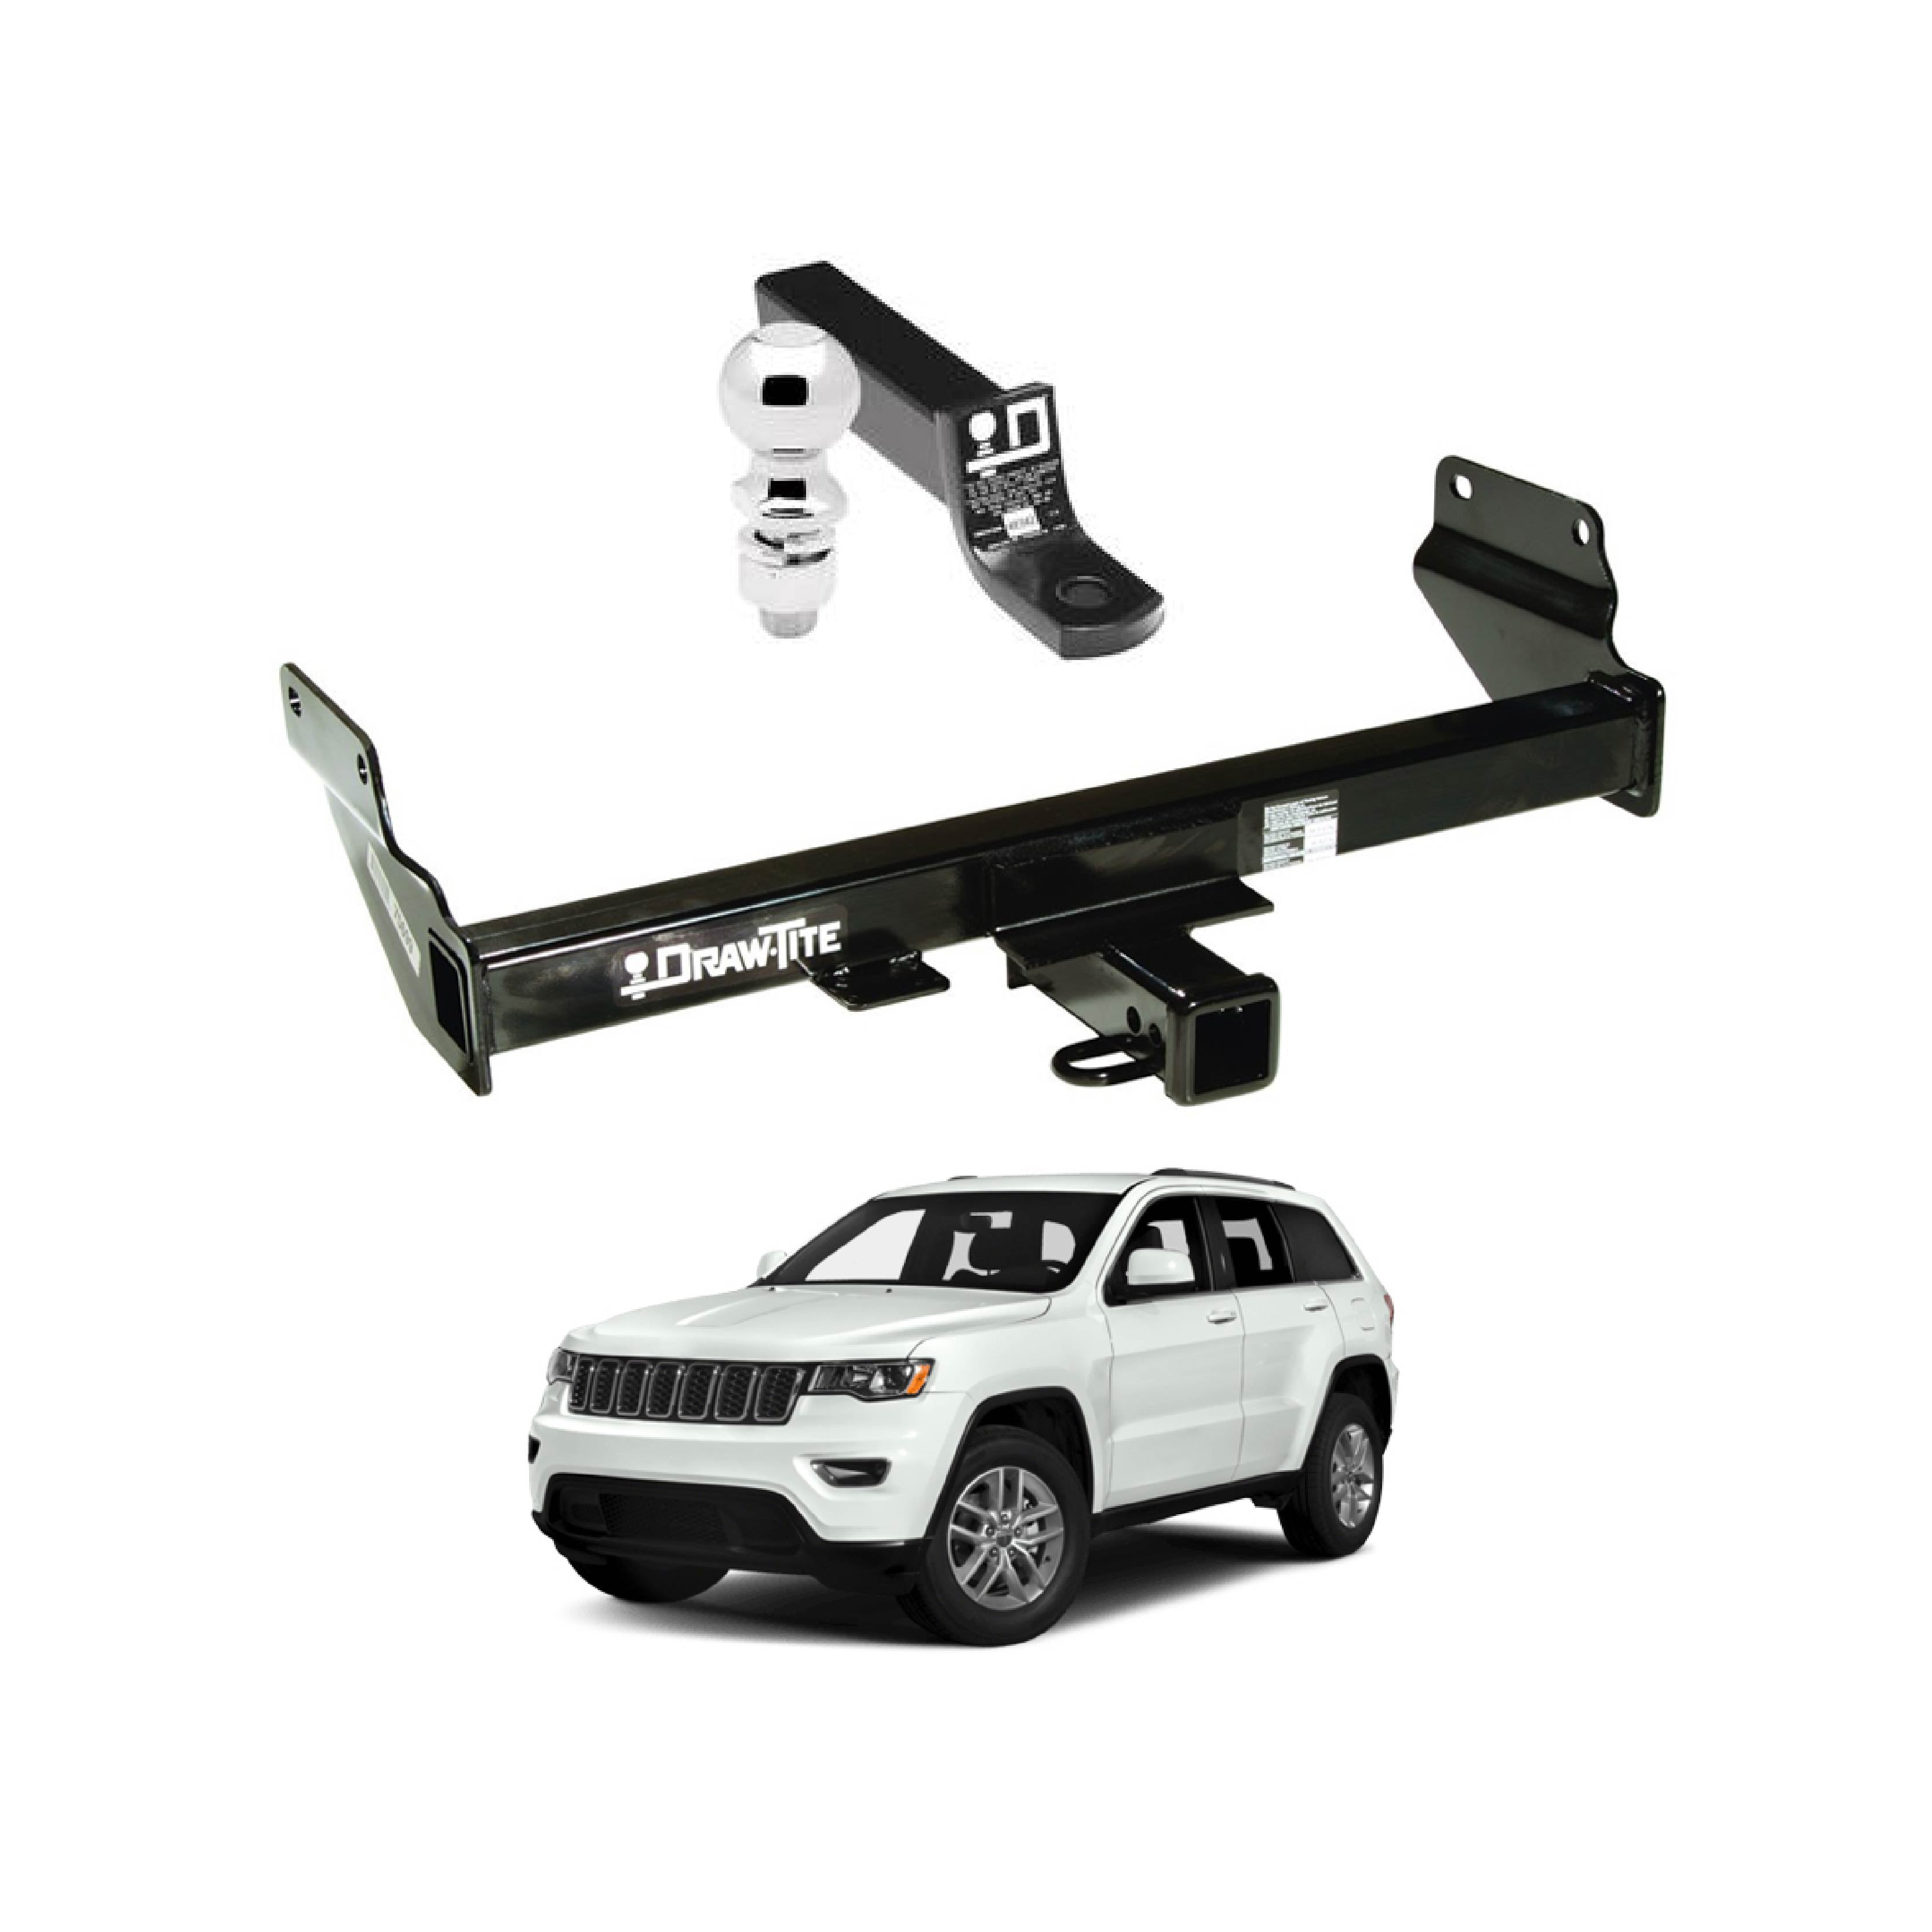 Draw Tite Towing Kit (Frame Receiver + Ball Mount) for 2015-2019 Jeep Grand Cherokee